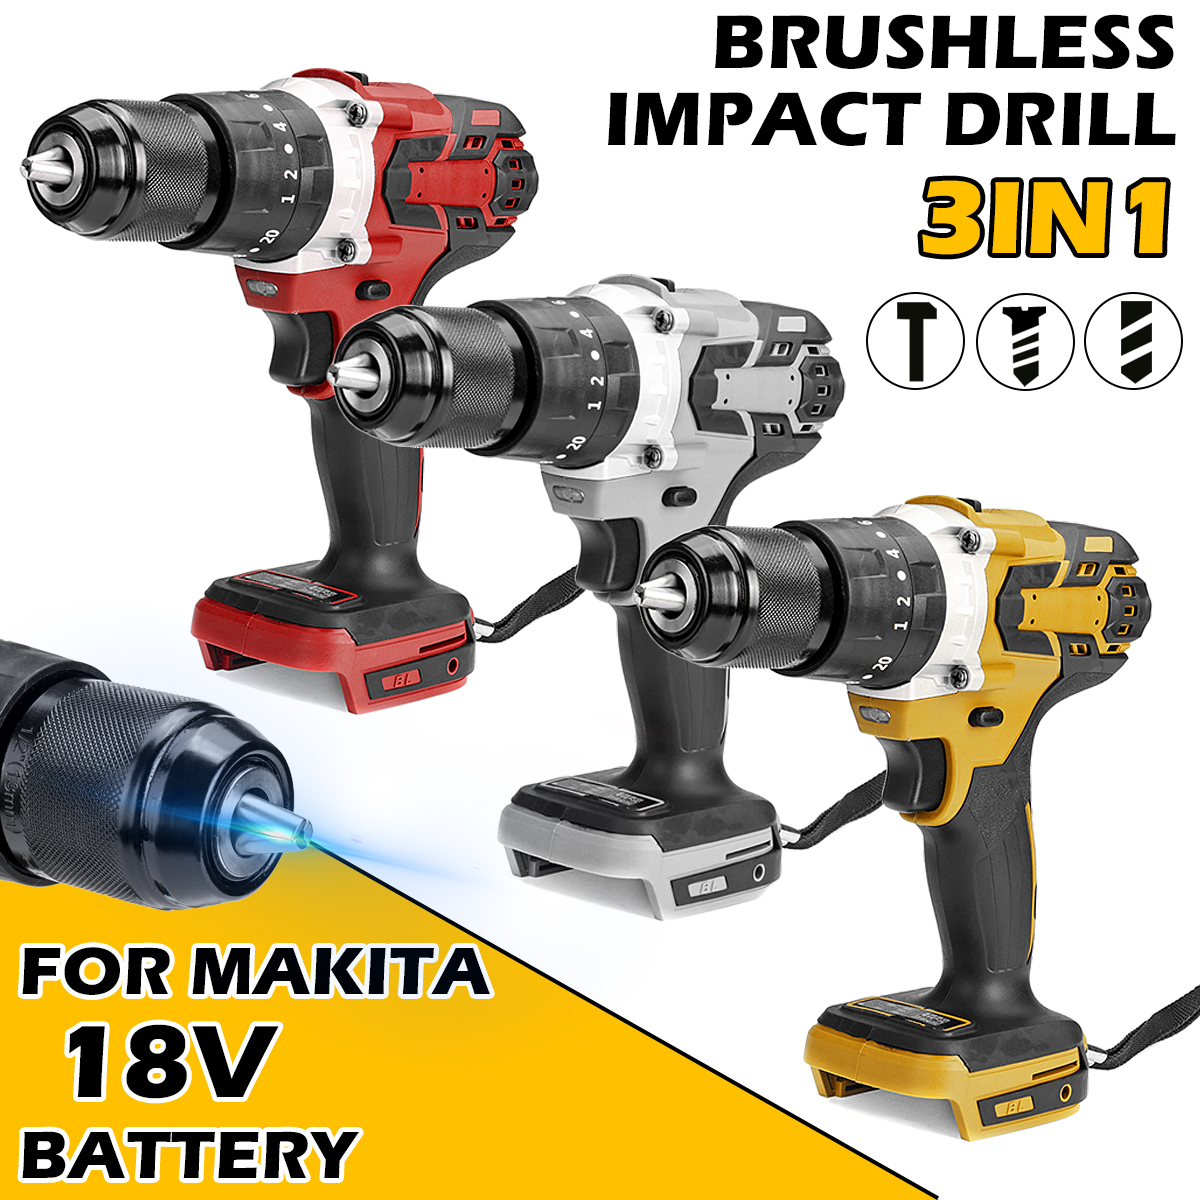 13mm-3-In-1-Brushless-Impact-Drill-Hammer-Cordless-Elctric-Hammer-Drill-Adapted-To-18V-Makita-Batter-1715080-1